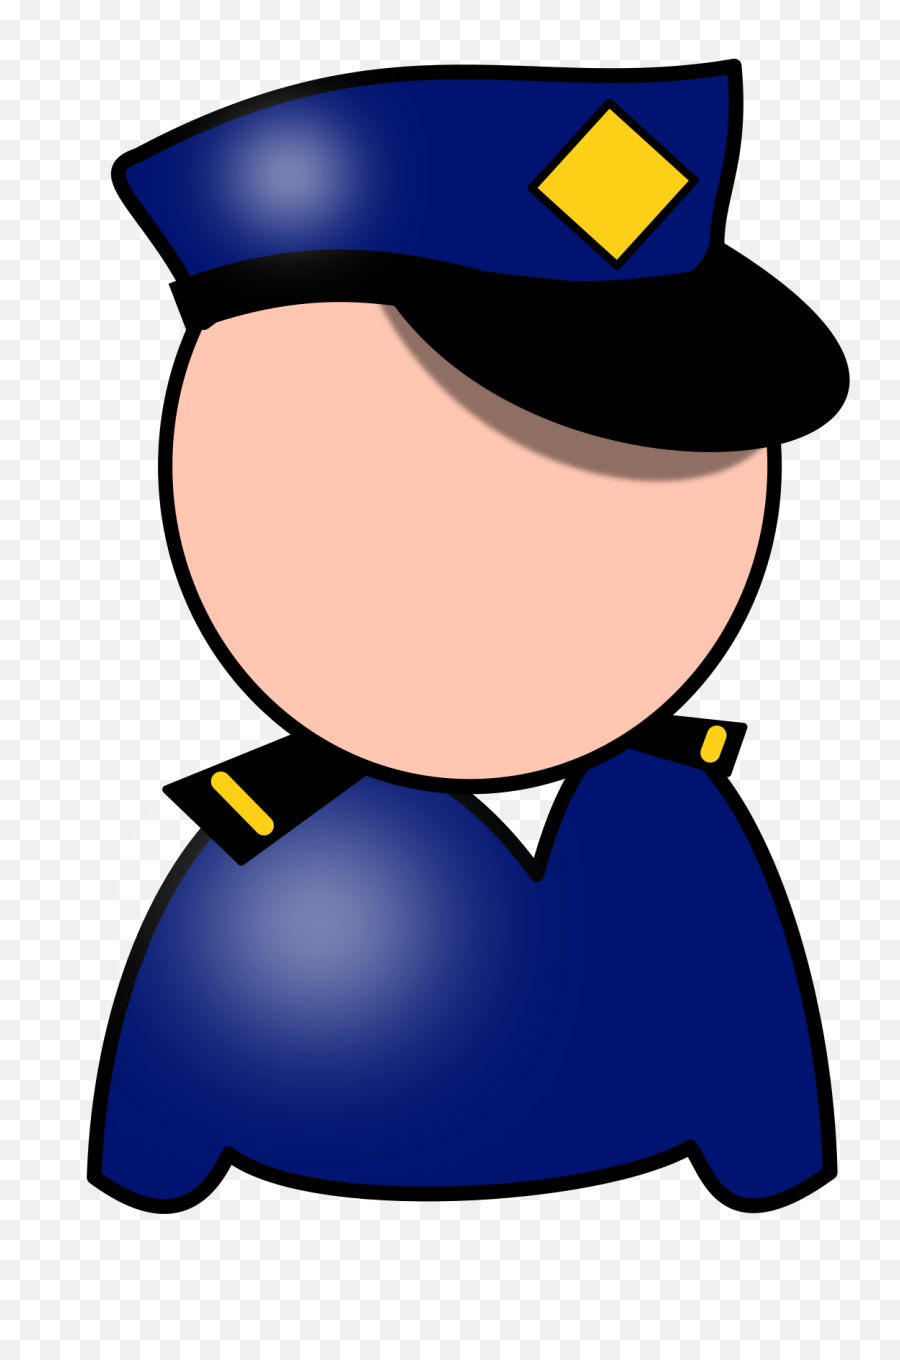 Police Clipart Hostted 2 - Clipartbarn Police Art Clip Emoji,Police Badge Clipart